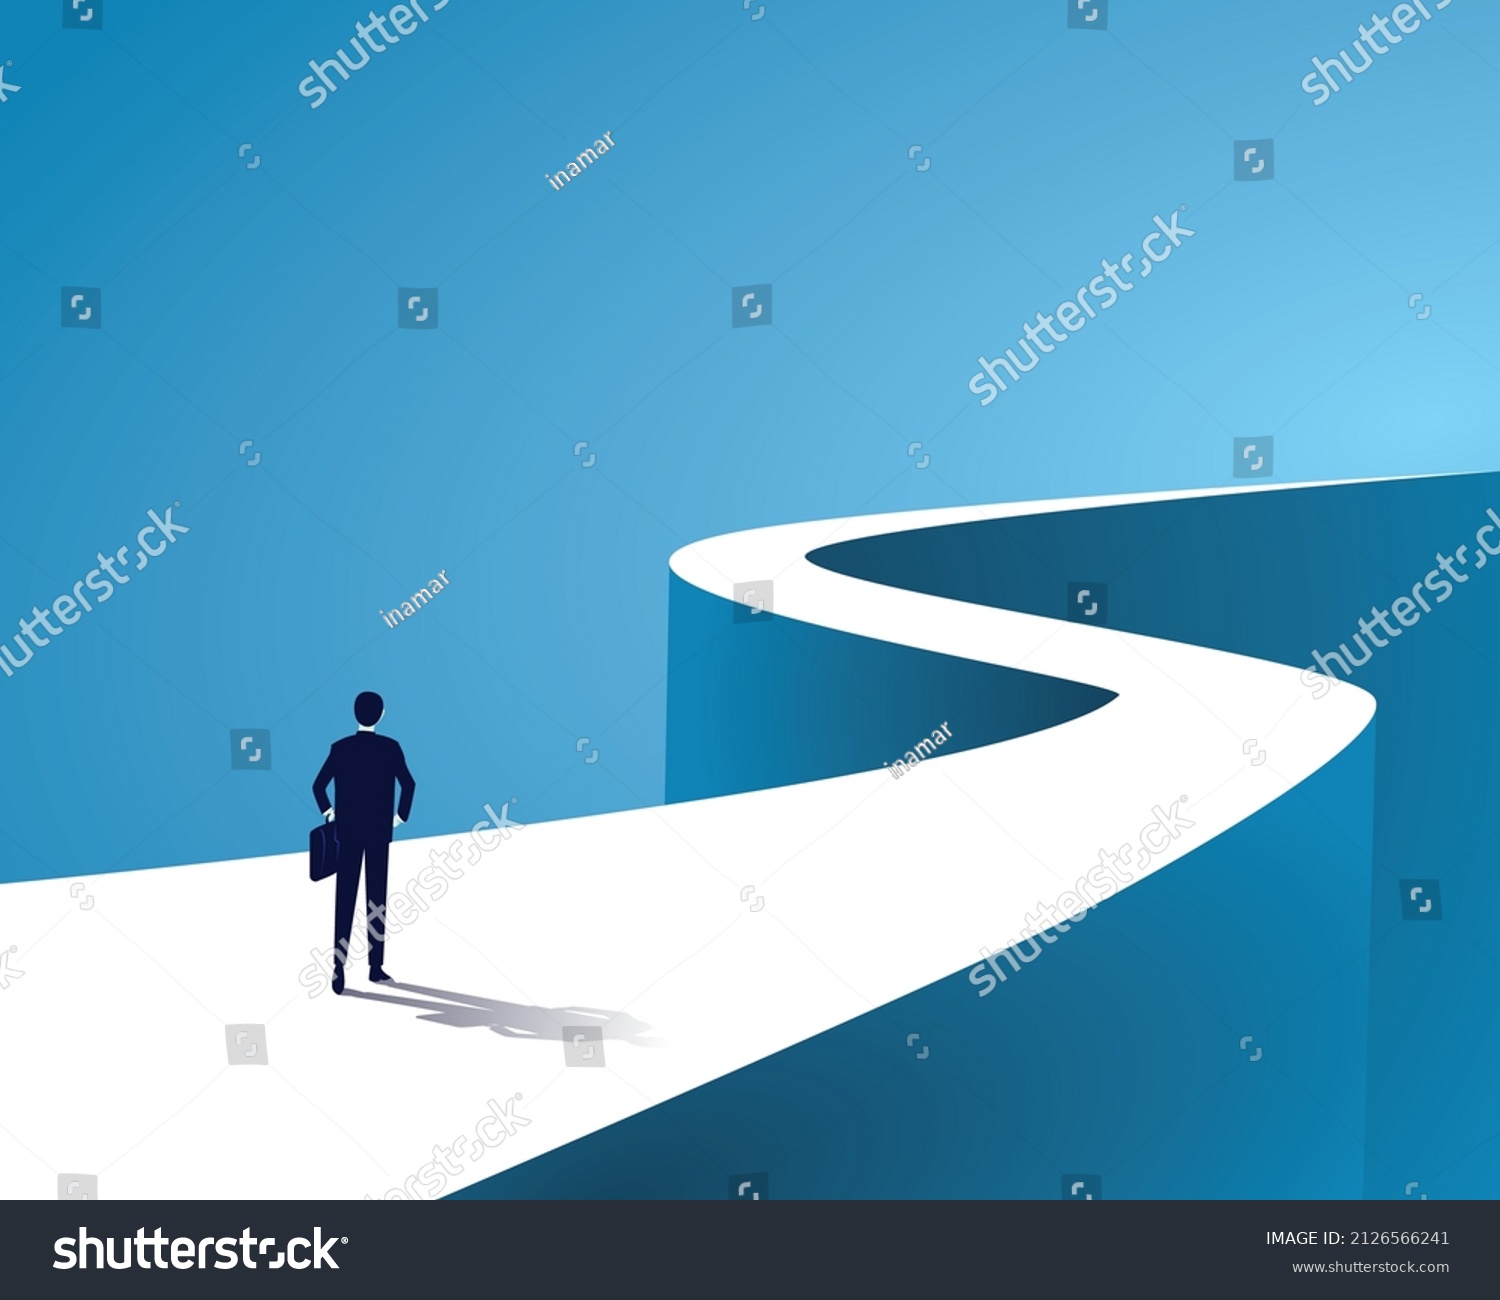 SVG of Business journey, businessman walking on long winding path going to success in the future concept svg